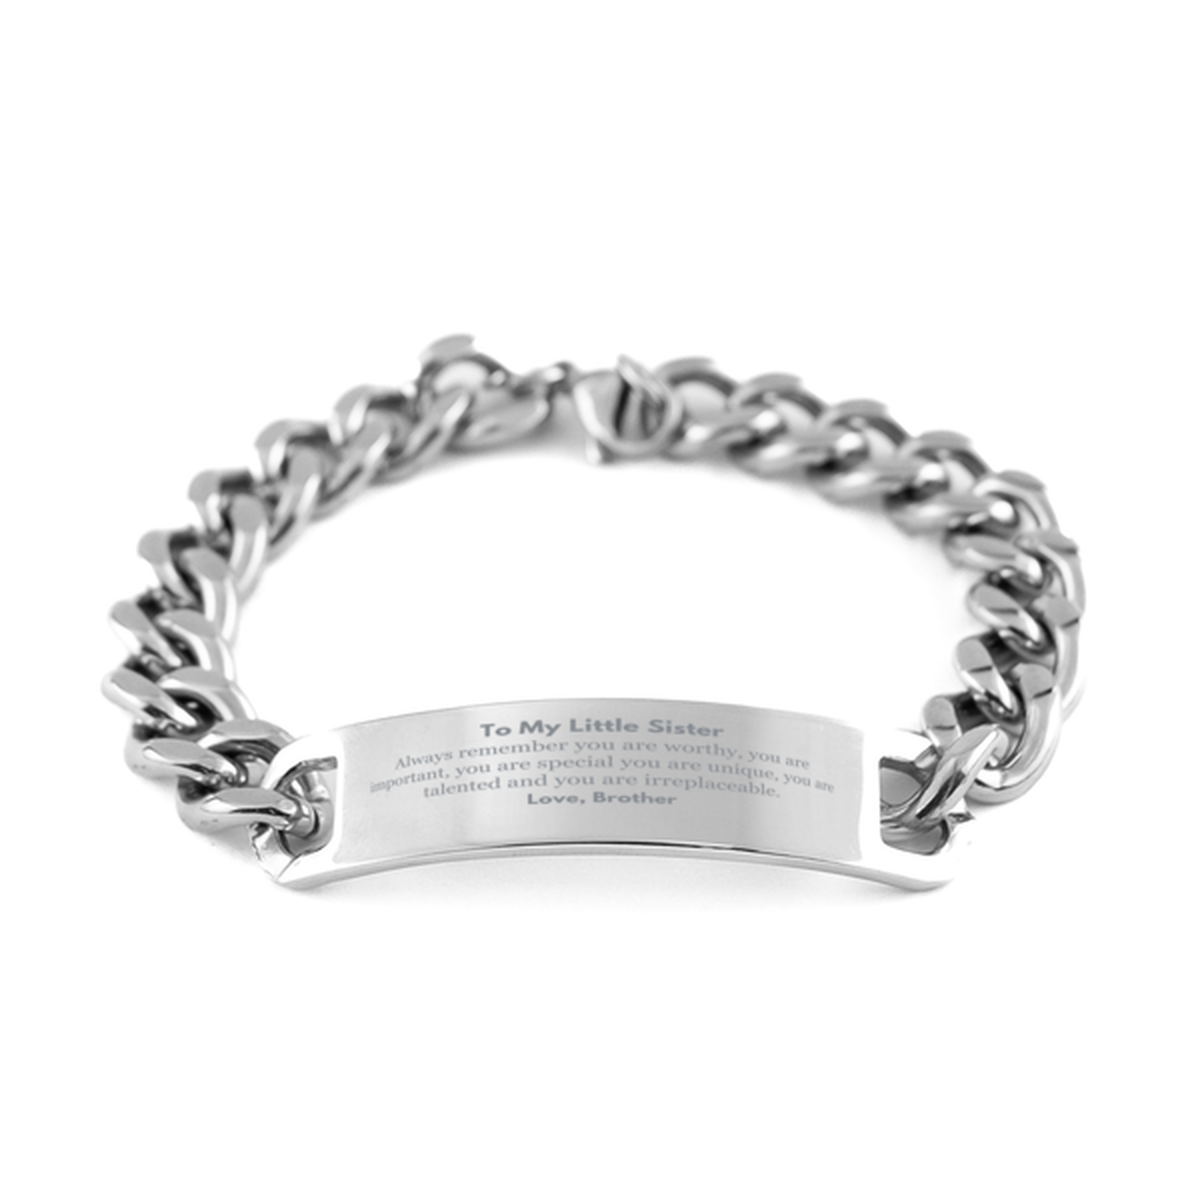 Little Sister Birthday Gifts from Brother, Inspirational Cuban Chain Stainless Steel Bracelet for Little Sister Christmas Graduation Gifts for Little Sister Always remember you are worthy, you are important. Love, Brother